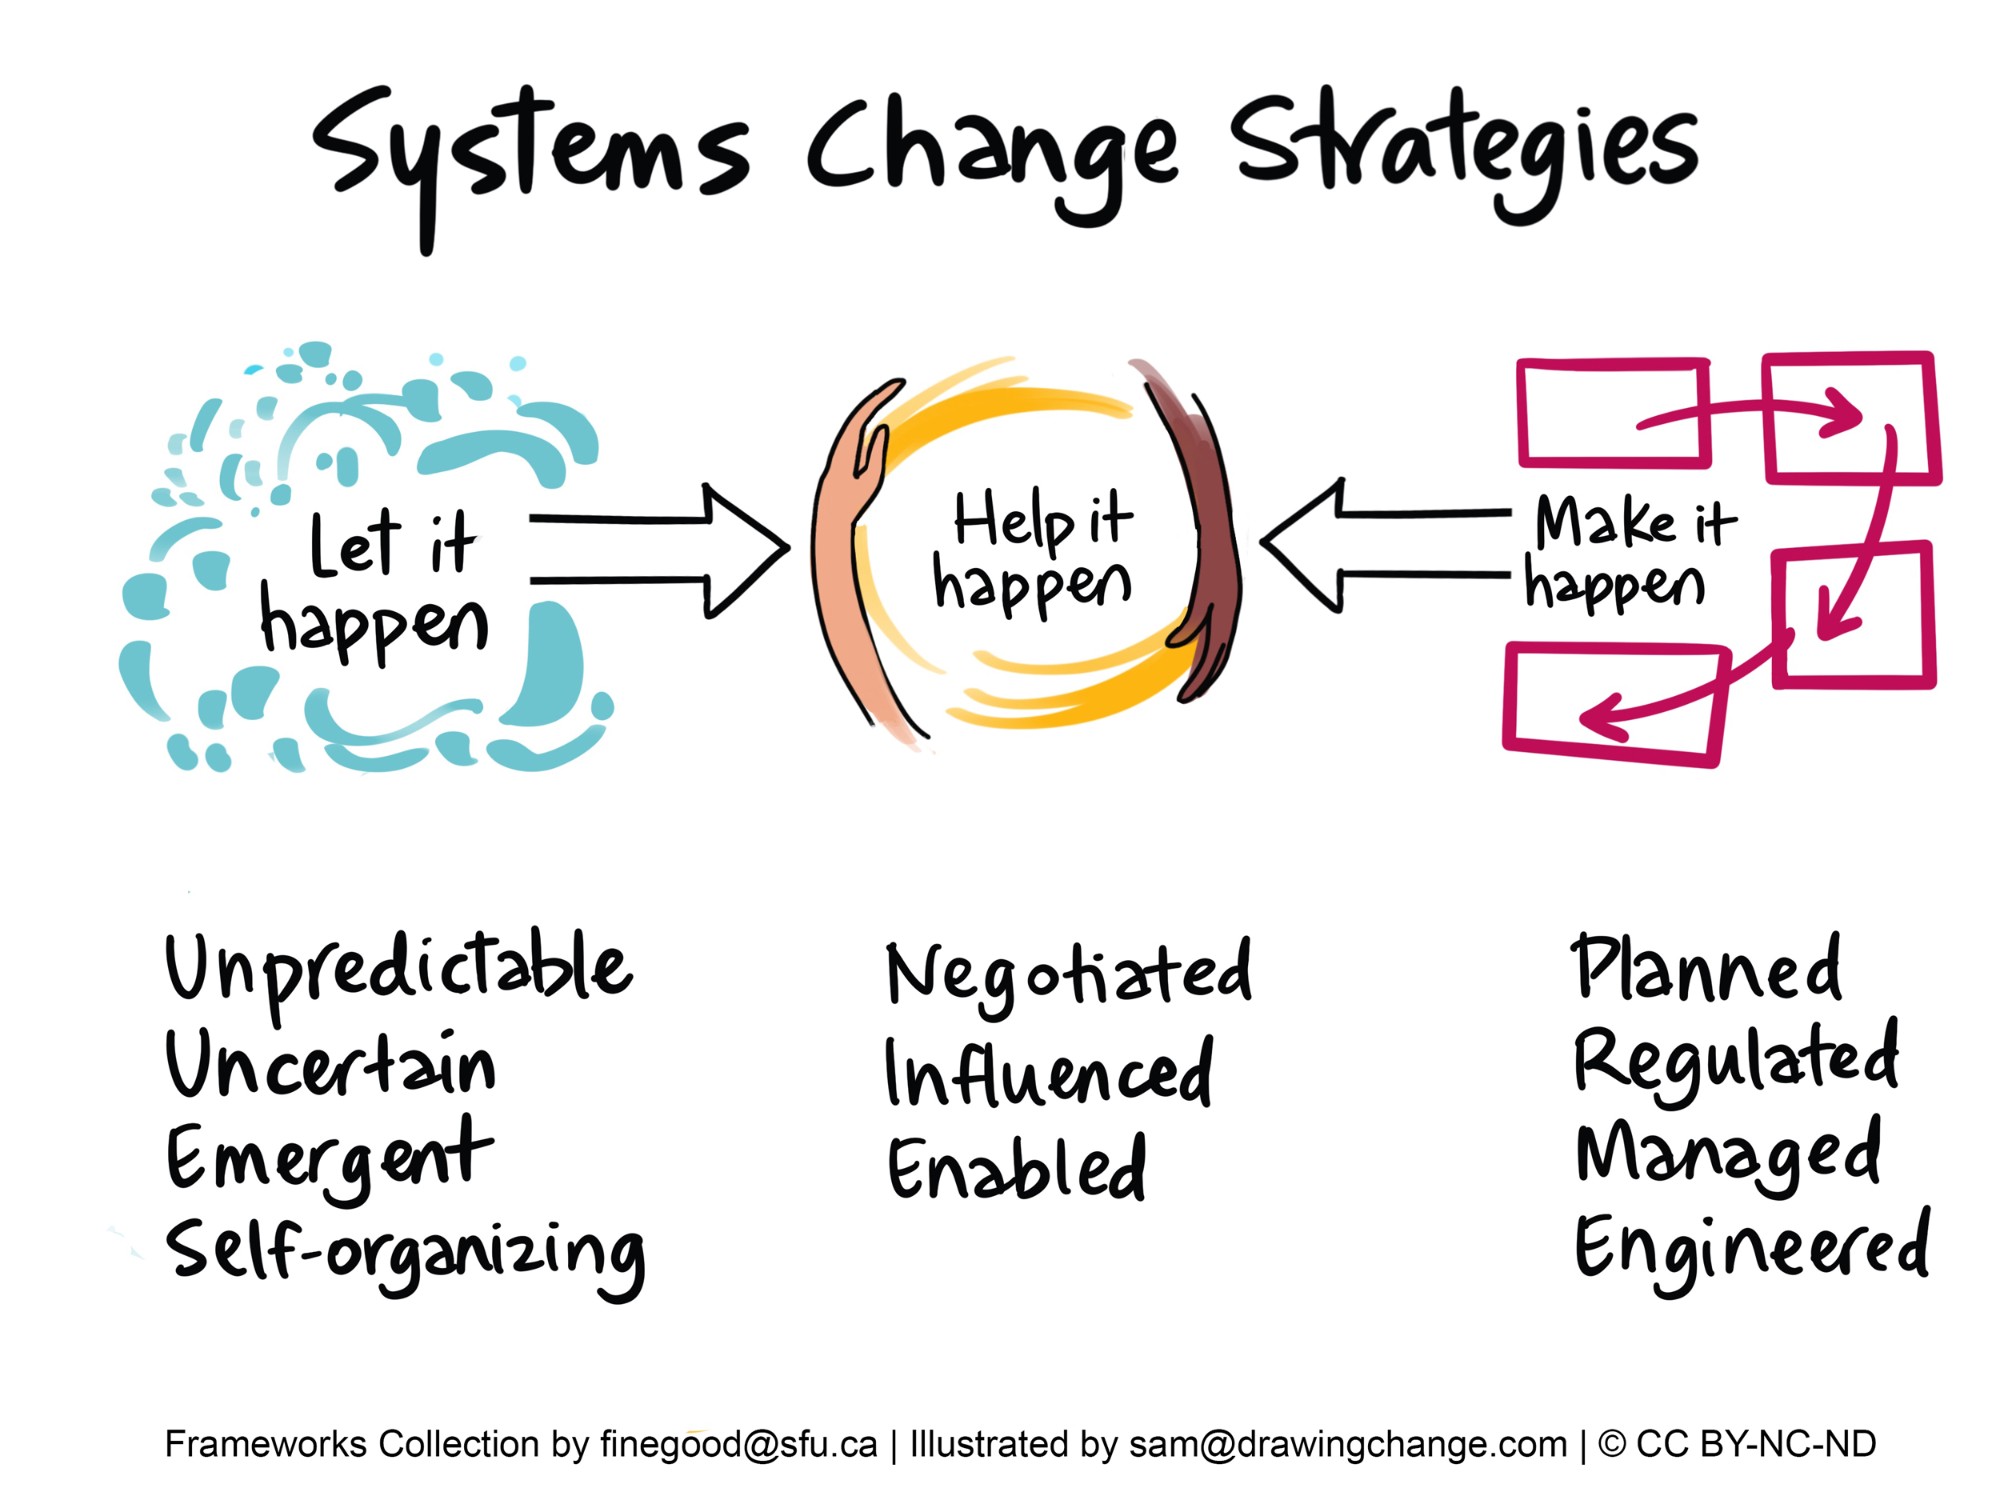 The image is a visual aid titled "Systems Change Strategies," part of the Frameworks Collection by finegood@sfu.ca and illustrated by sam@drawingchange.com, under a Creative Commons license (CC BY-NC-ND). It showcases three different approaches to effecting change within systems:  "Let it happen" on the left is represented by a swirl of blue lines, connoting a more passive approach. Below it are the words "Unpredictable, Uncertain, Emergent, Self-organizing," which describe characteristics of a system allowed to evolve without intervention.  "Make it happen" on the right is depicted with a series of pink squares interconnected with arrows, implying a more active and directive approach. Below are the descriptors "Planned, Regulated, Managed, Engineered," all of which point to a structured and deliberate method of implementing change.  "Help it happen" is in the centre and illustrated by two hands suggesting facilitation. The terms below it - "Negotiated, Influenced, Enabled, Engaged" - indicate a strategy where the change is guided and supported, but not forcefully directed.